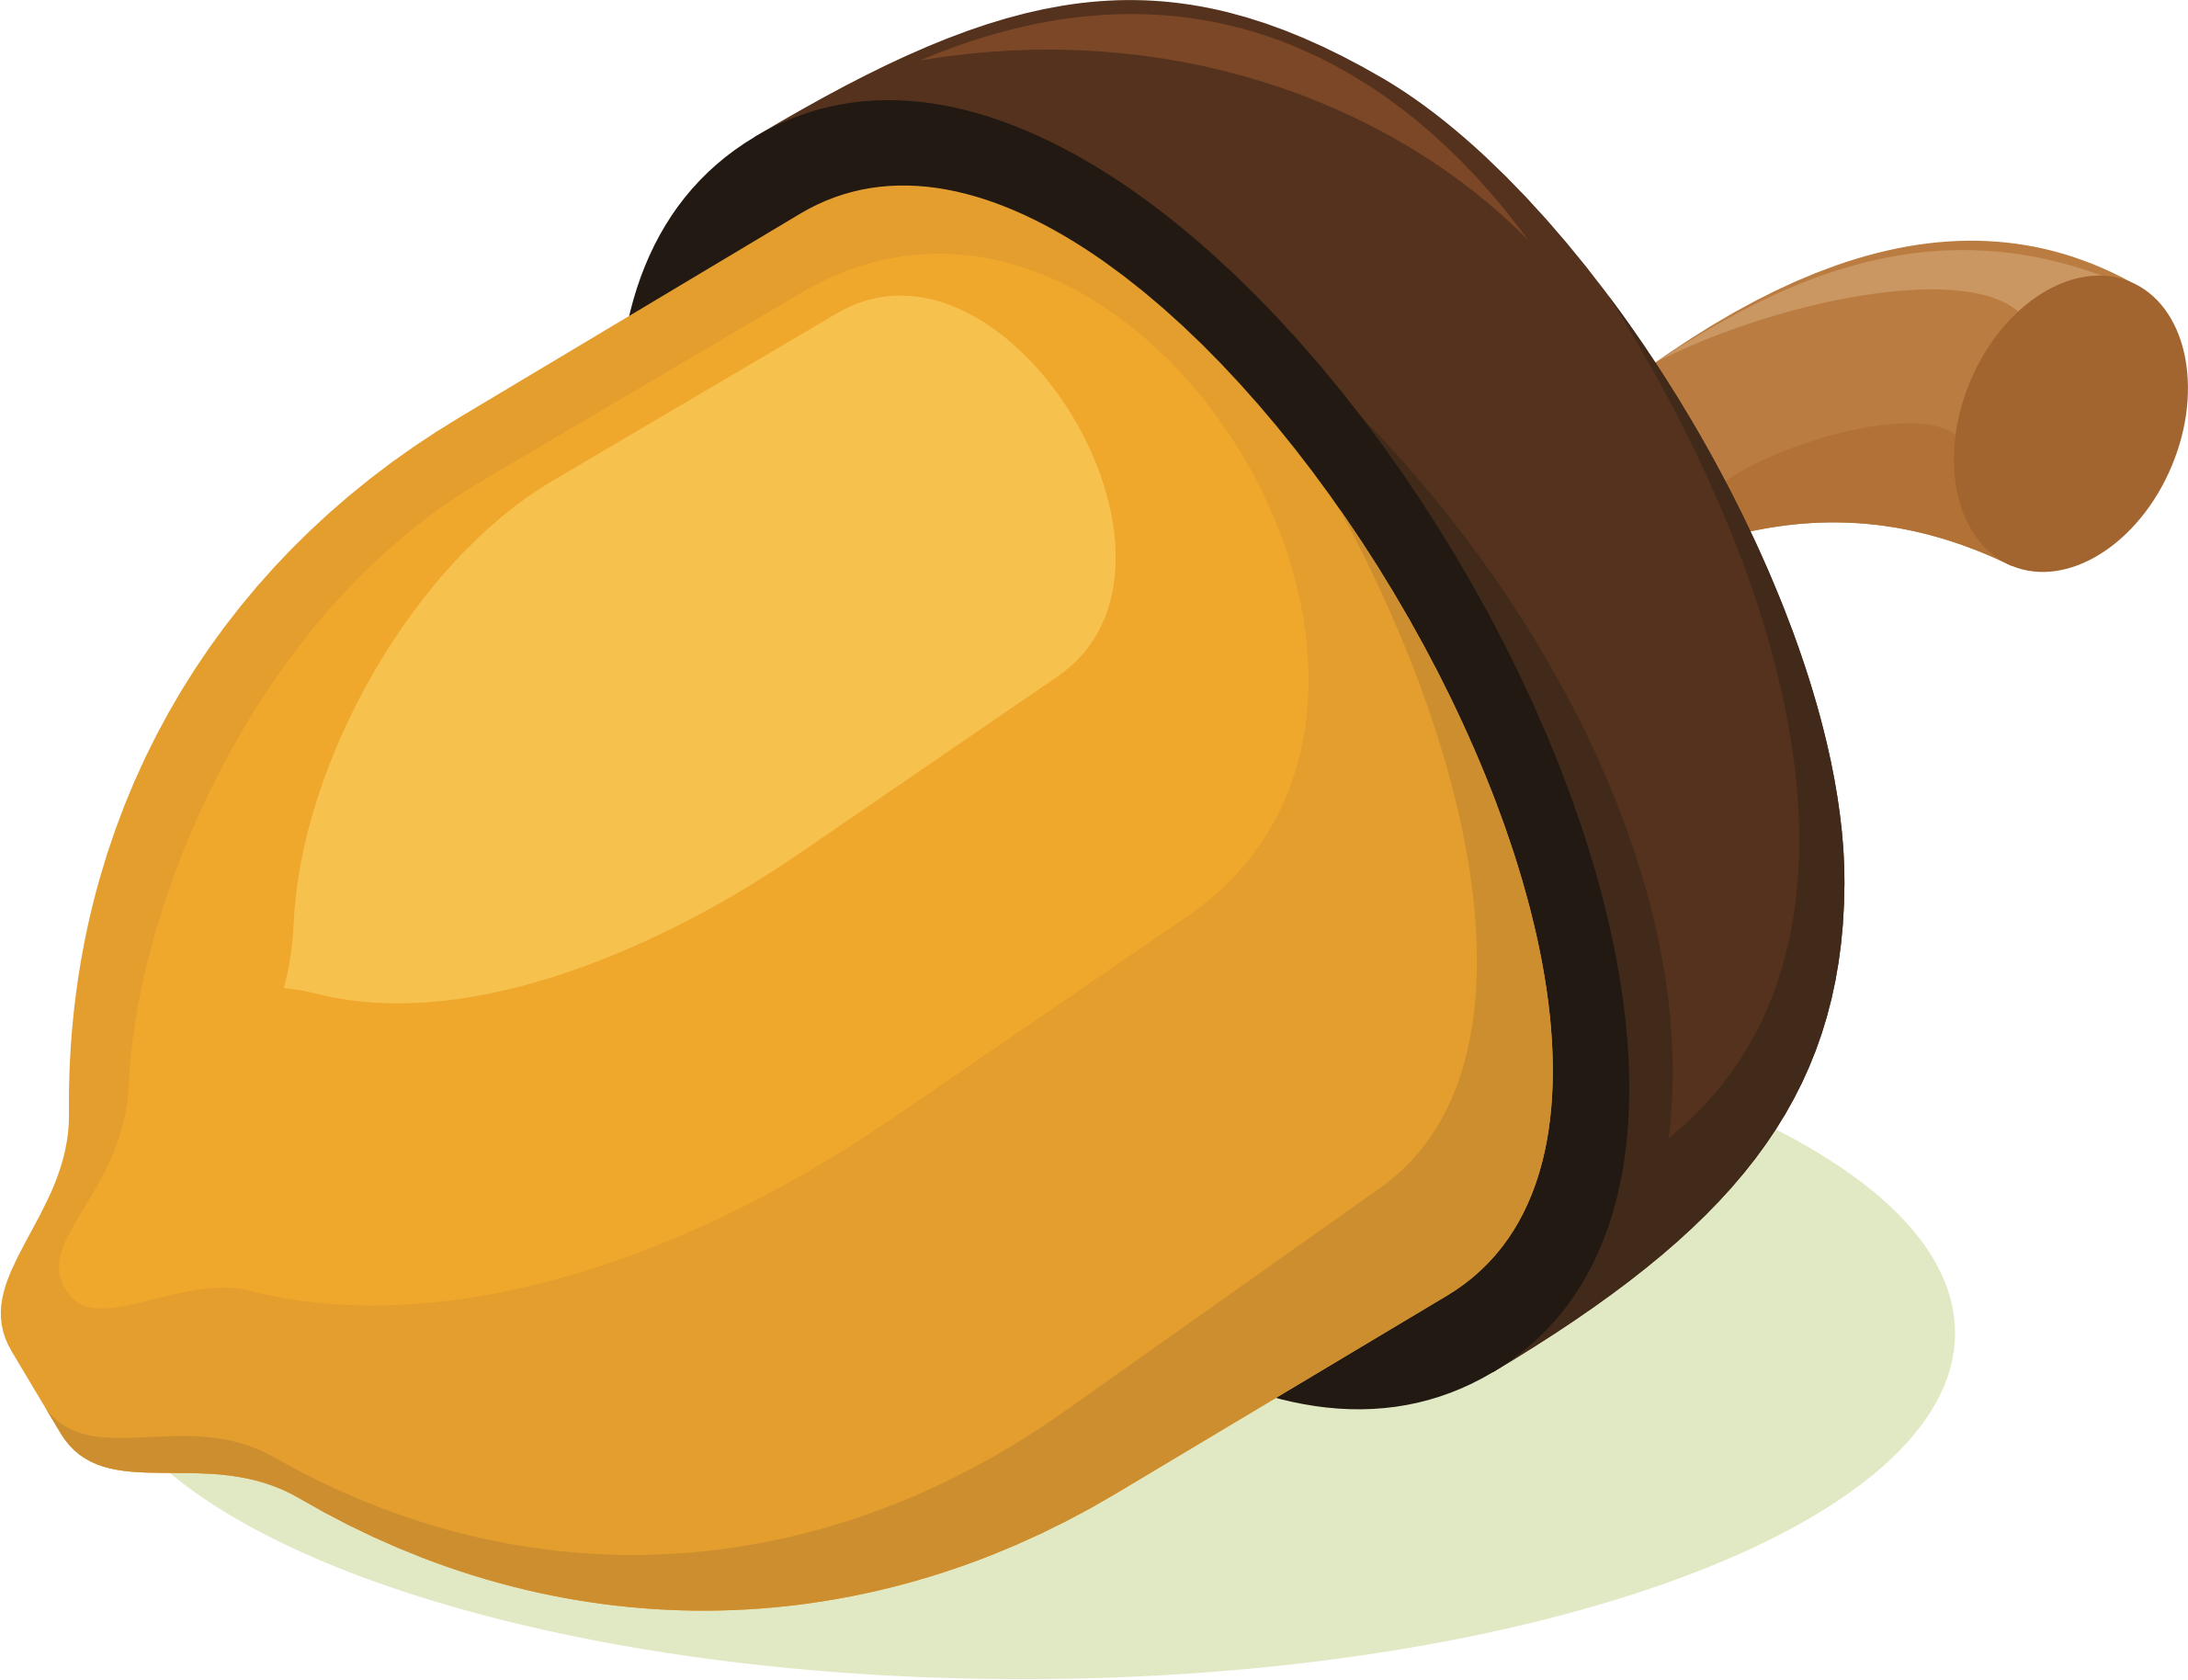 Photos Vector Acorn PNG Image High Quality PNG Image